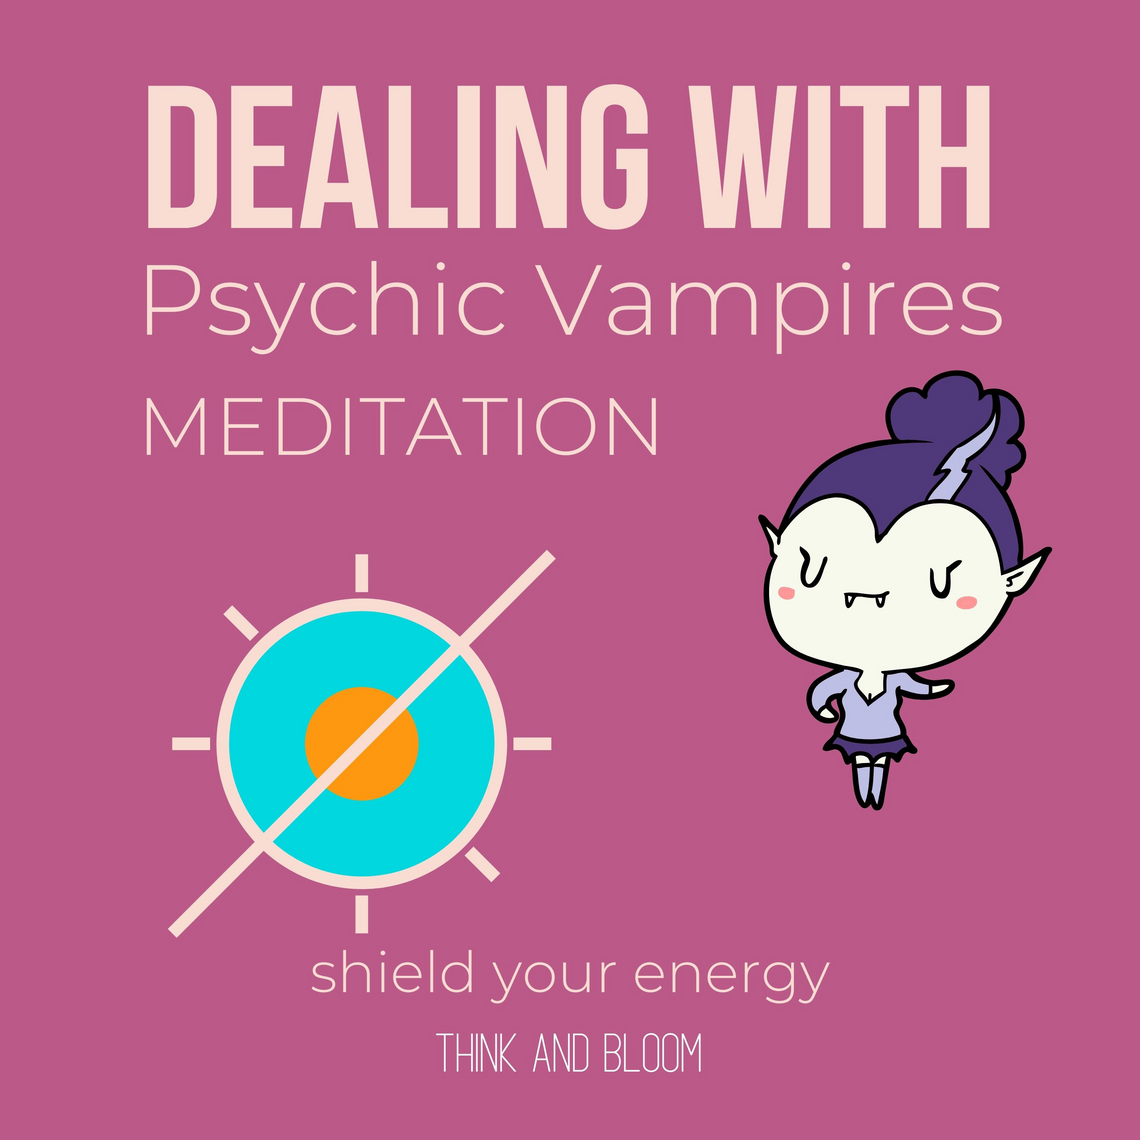 Dealing With Psychic Vampires Meditation Shield your energy by